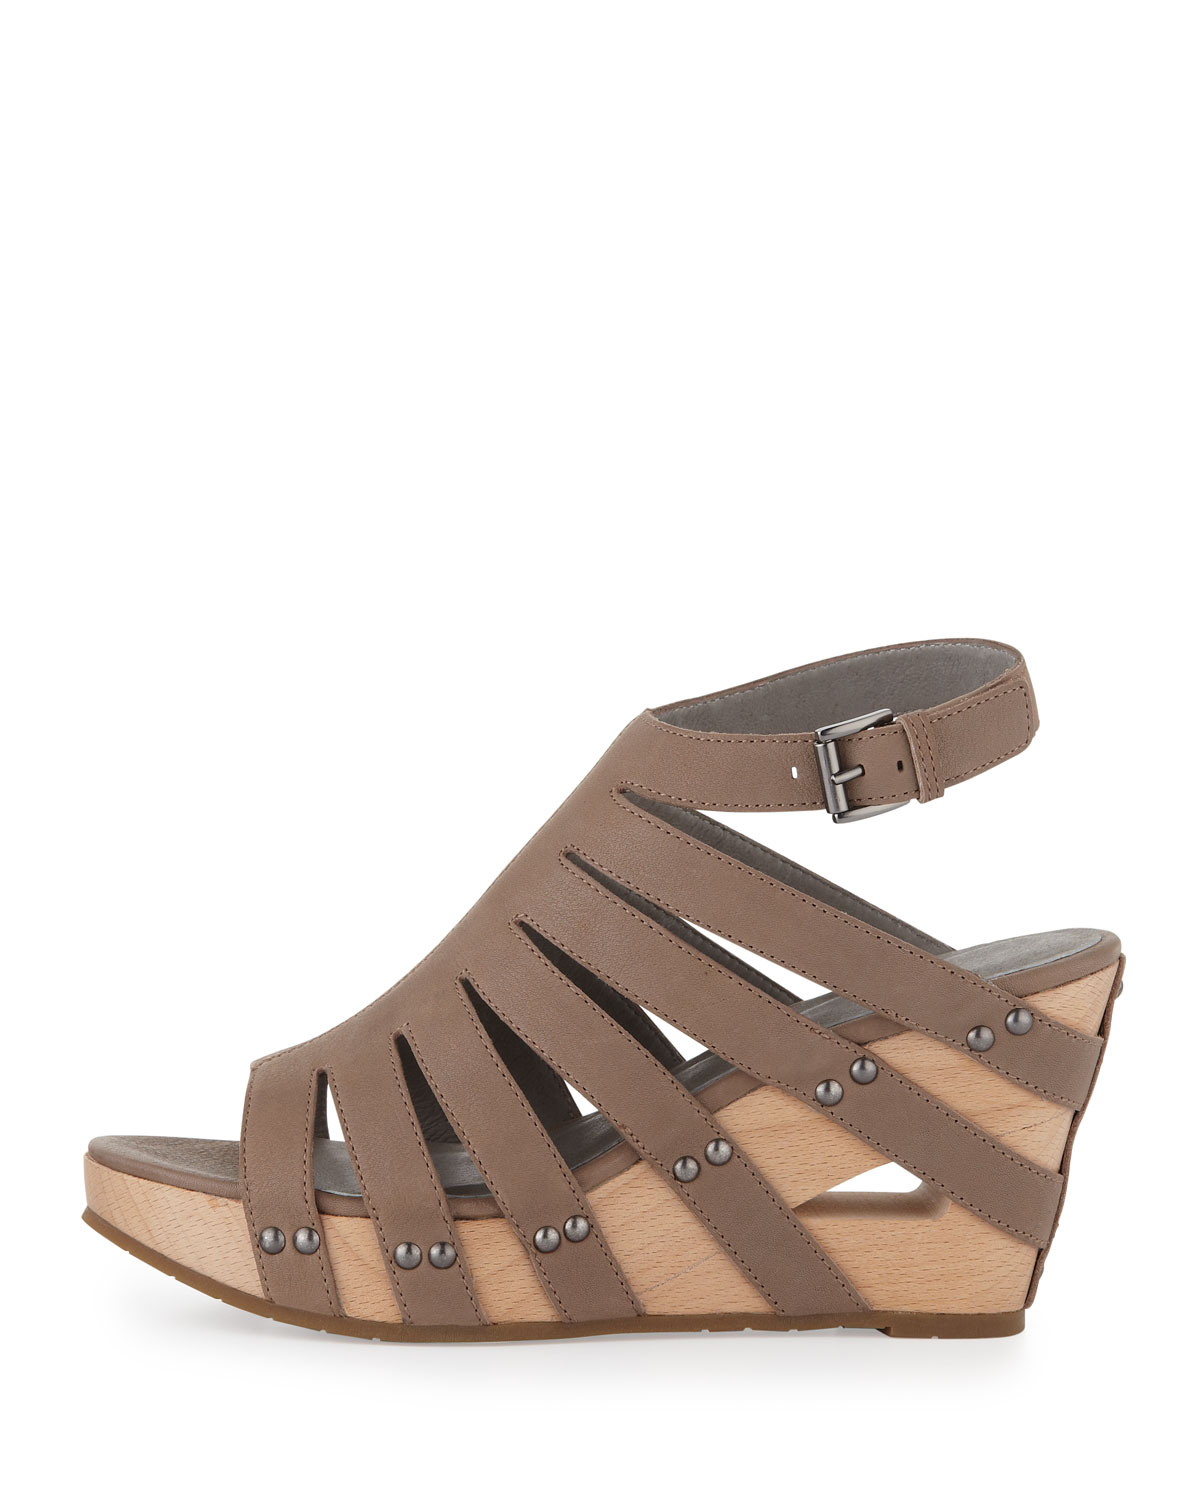 eileen-fisher-brown-lotus-strappy-wedge-sandal-taupe--wedge-sandals ...